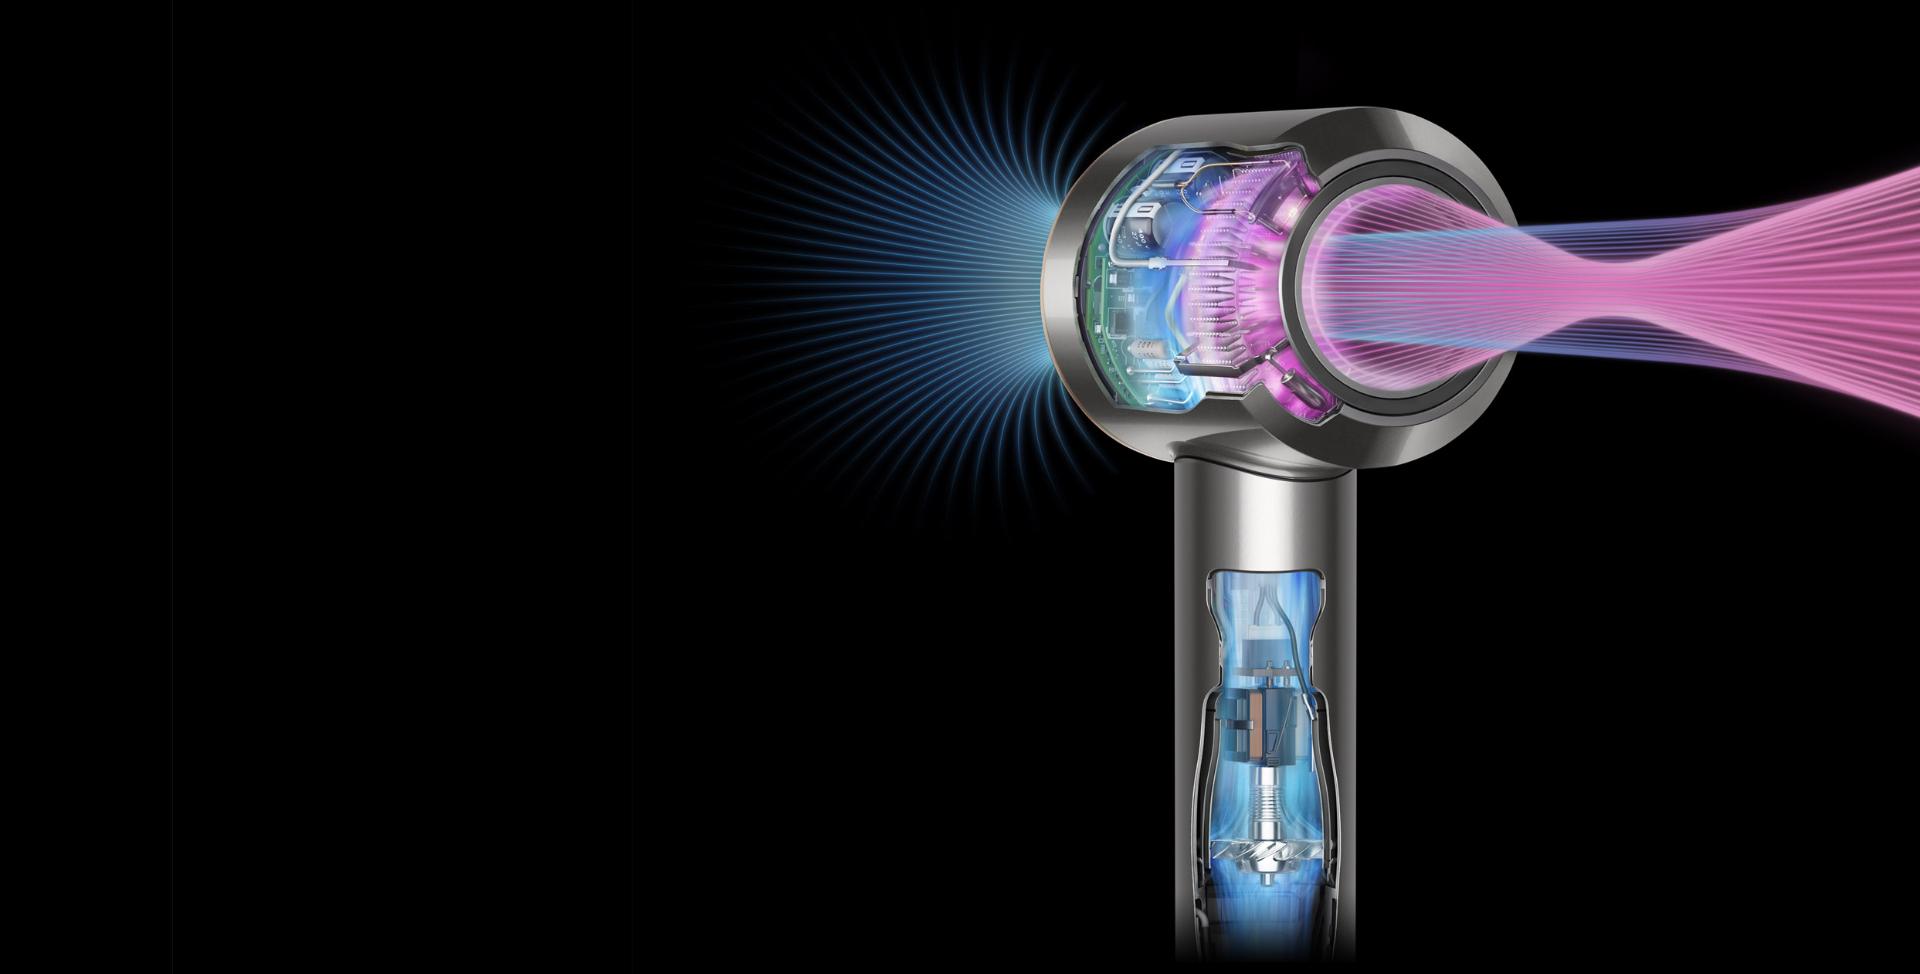 Cutaways of the Supersonic hair dryer to demonstrate powerful airflow and intelligent heat control